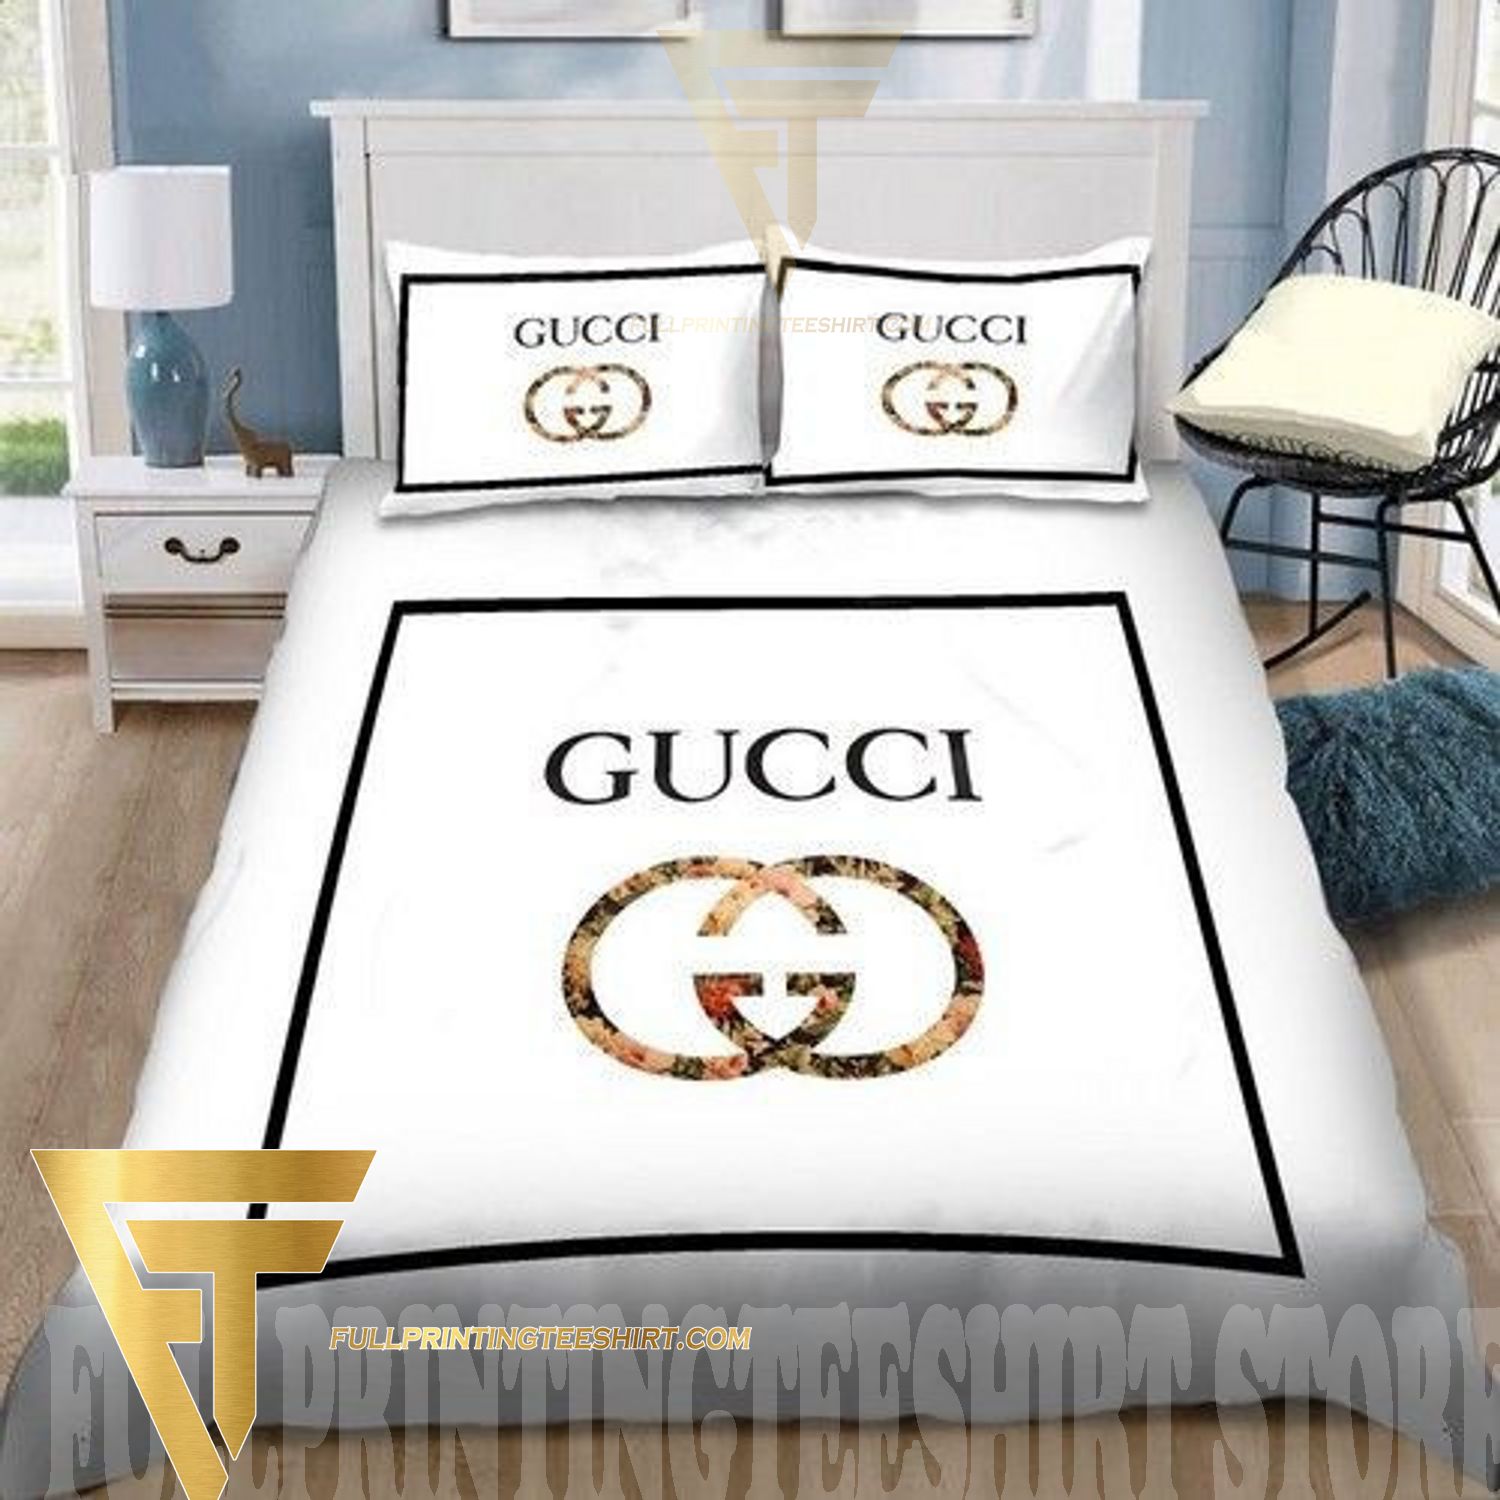 Top-selling item] Gucci 22 Bedding Sets Bedroom Luxury Brand Bedding